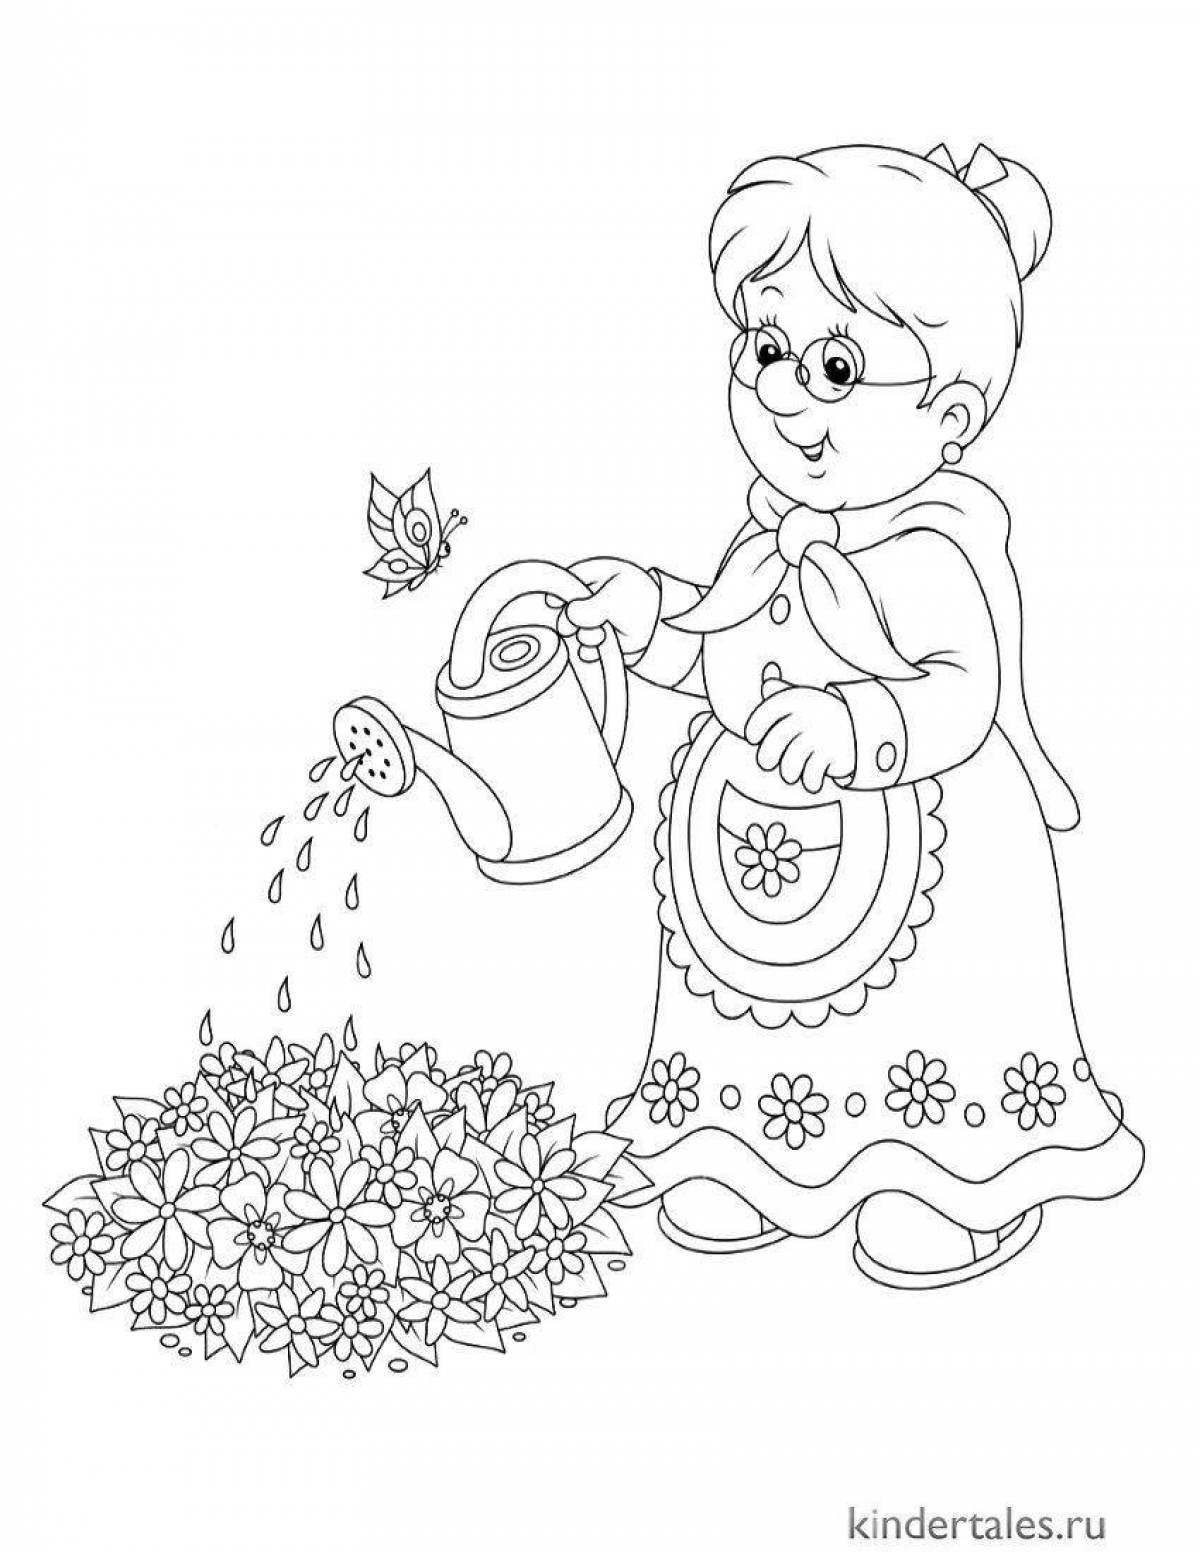 Coloring page cheerful grandmother